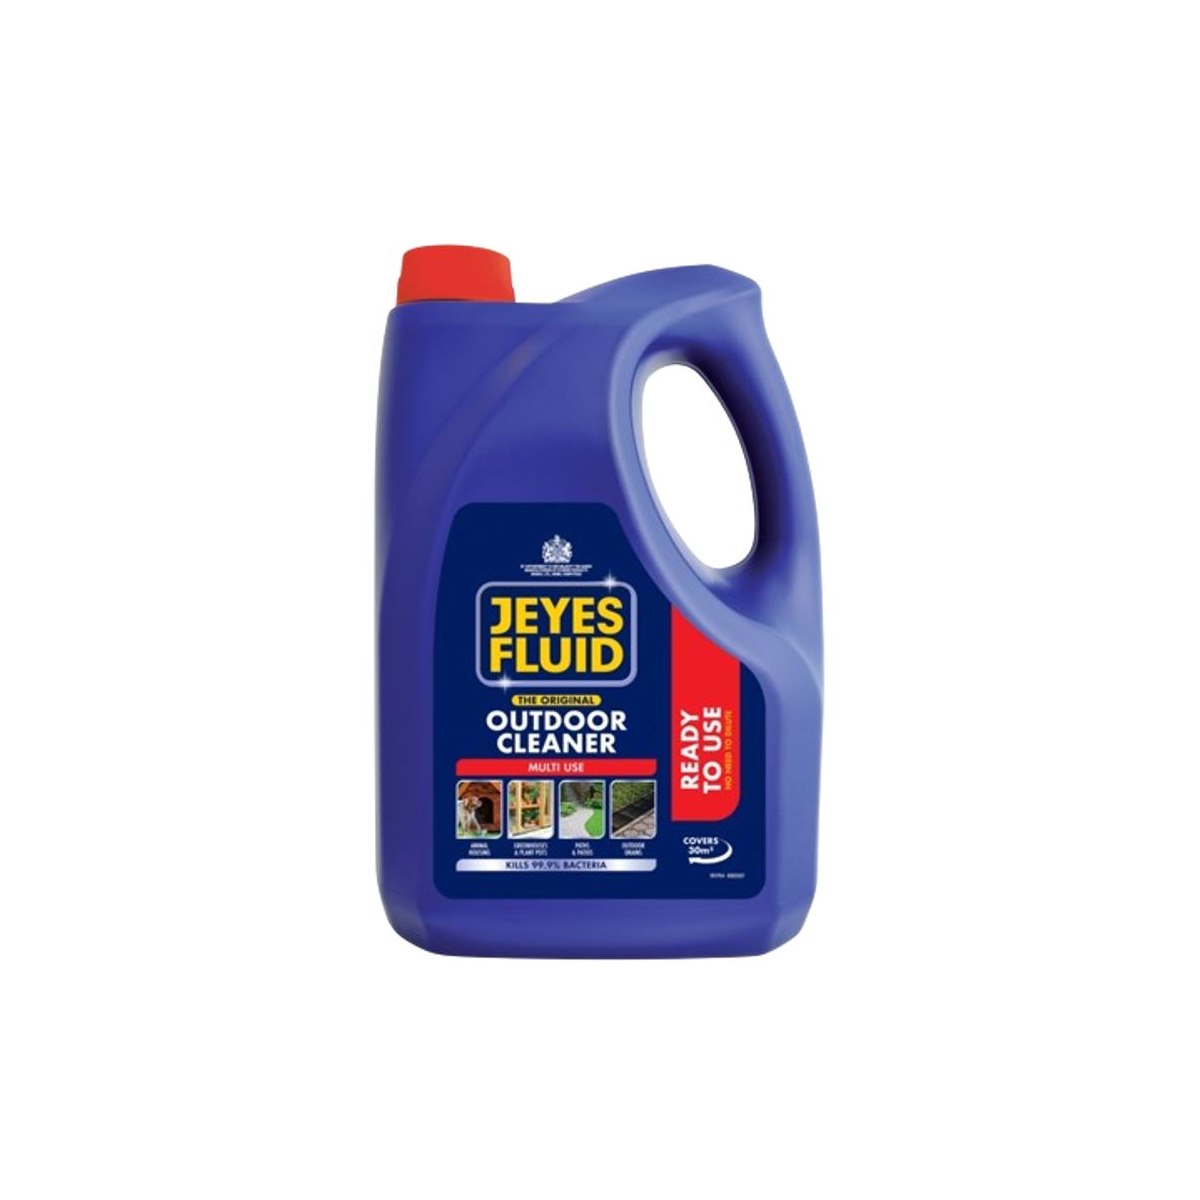 Jeyes Fluid Ready to Use Outdoor Cleaner 4L